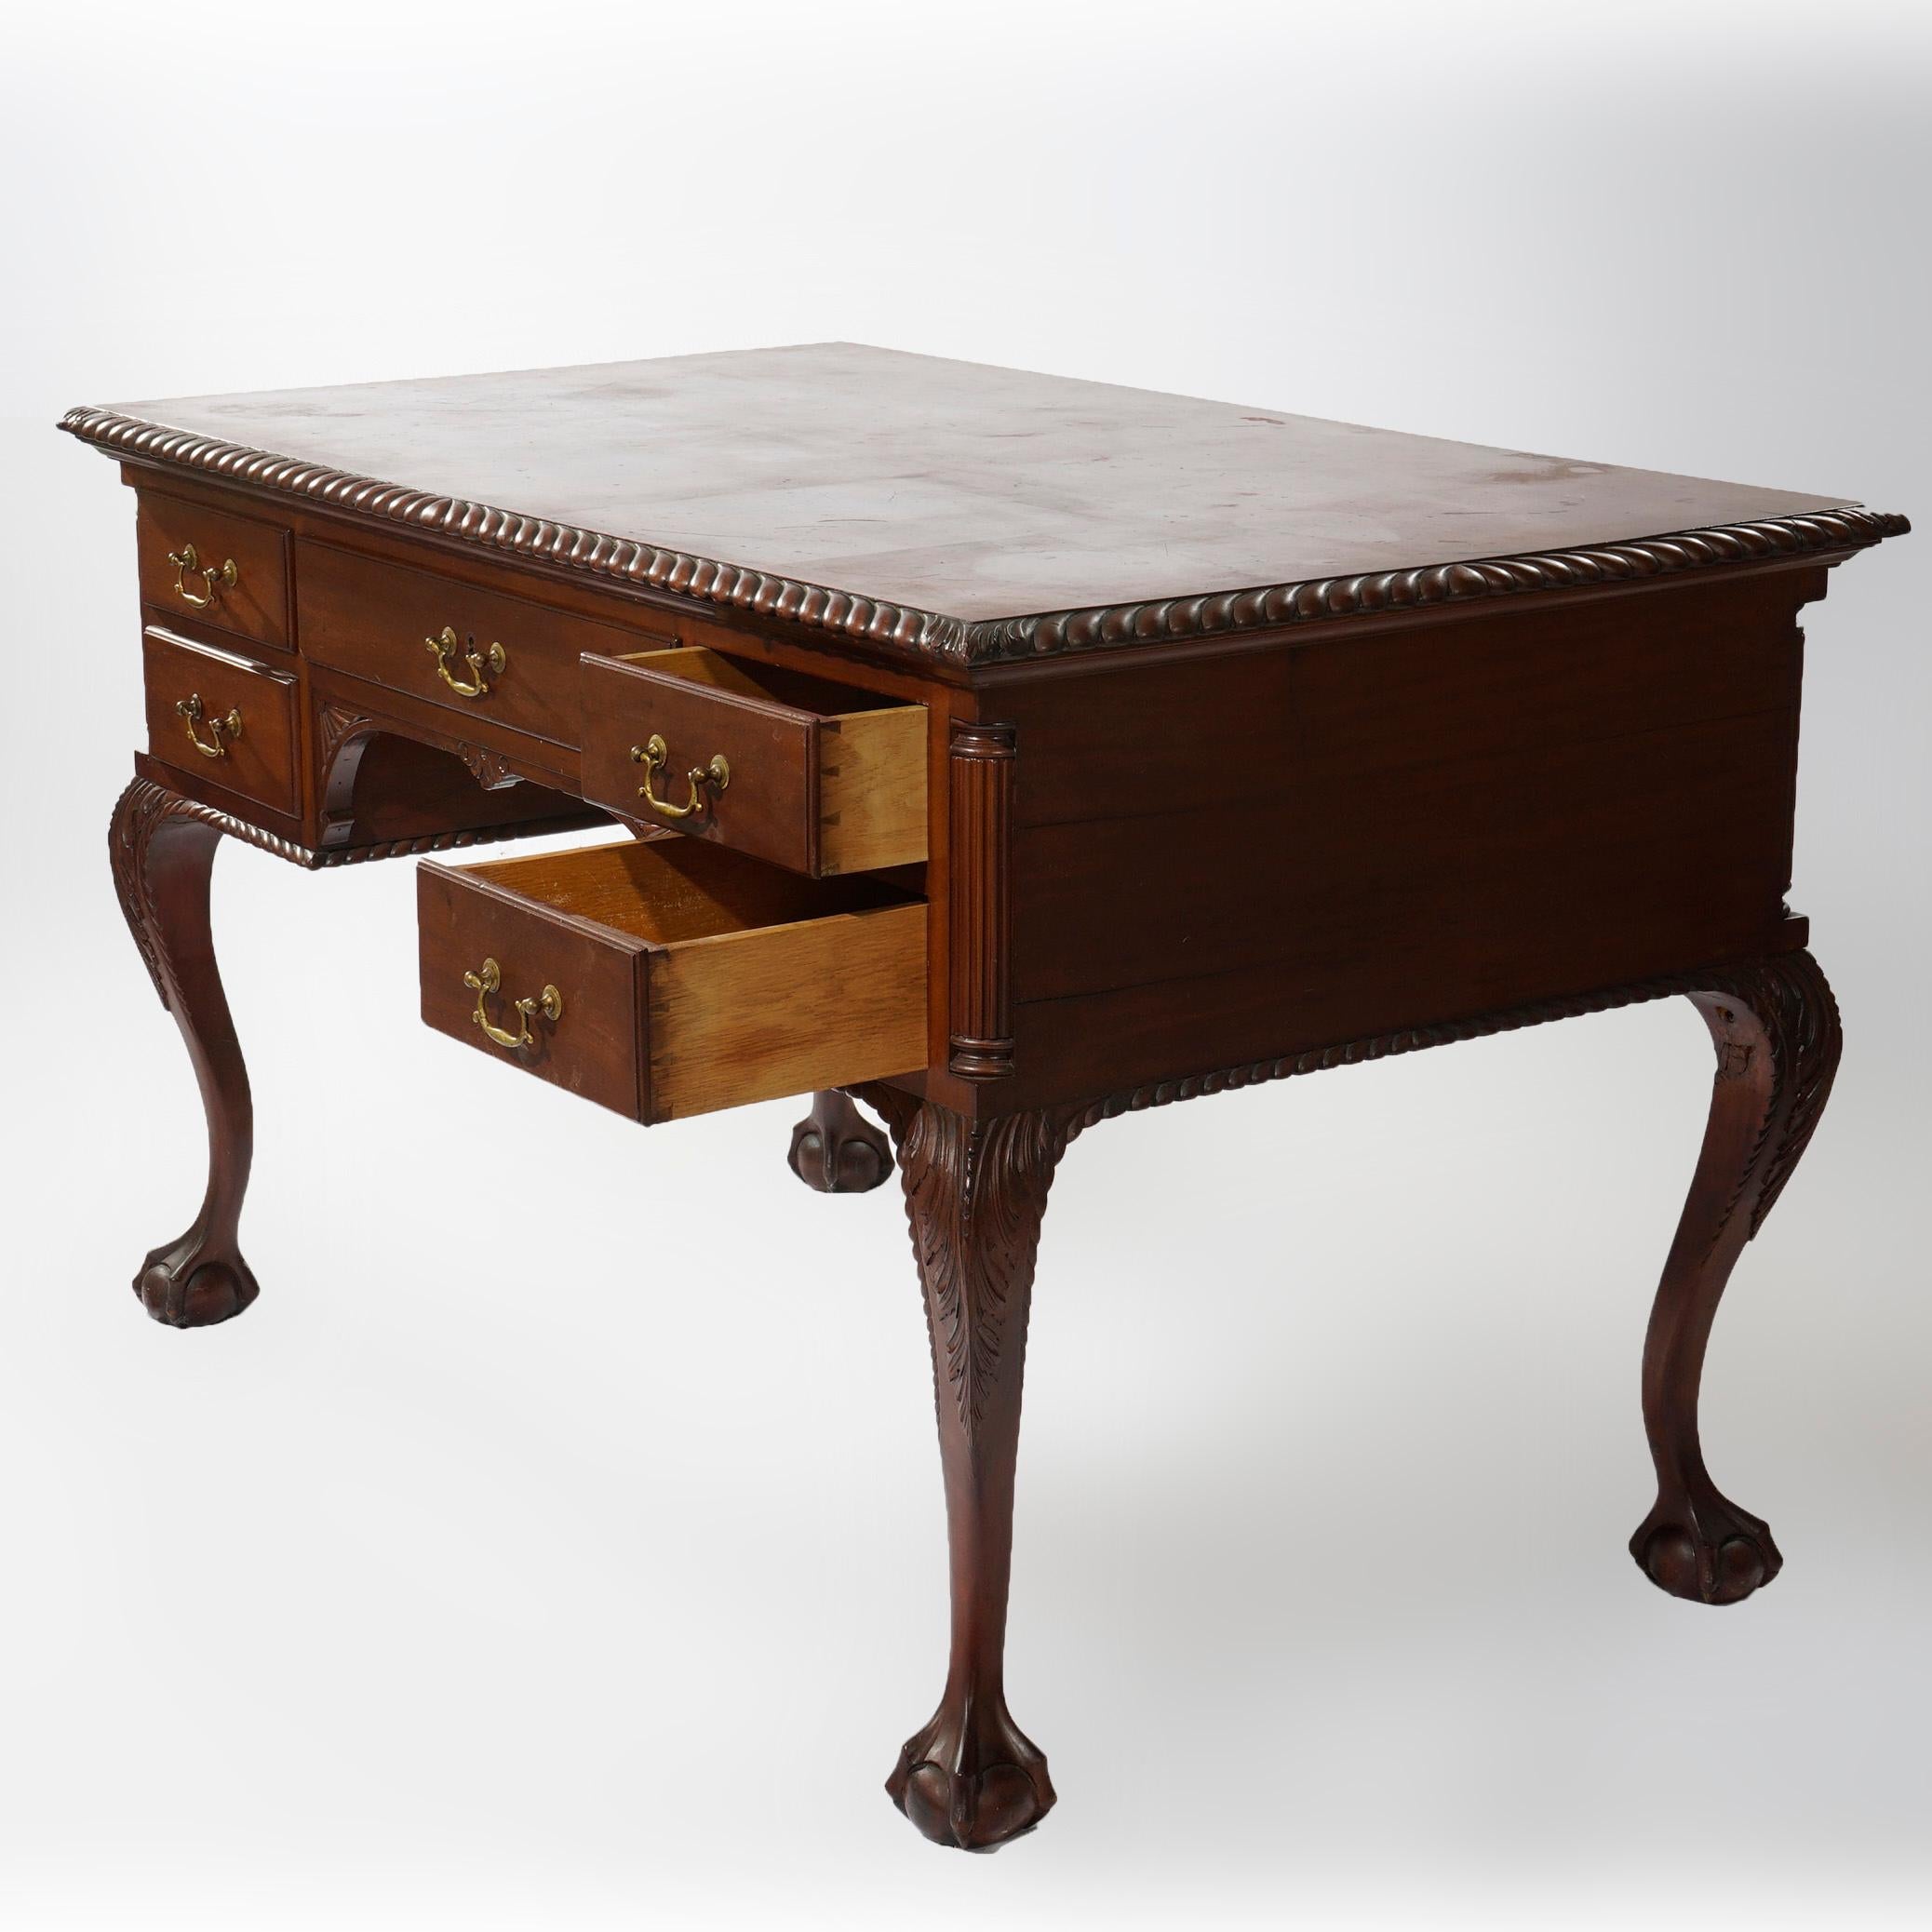 20th Century Antique Chippendale Carved Mahogany Knee Hole Desk, Claw & Ball Feet, C1920 For Sale